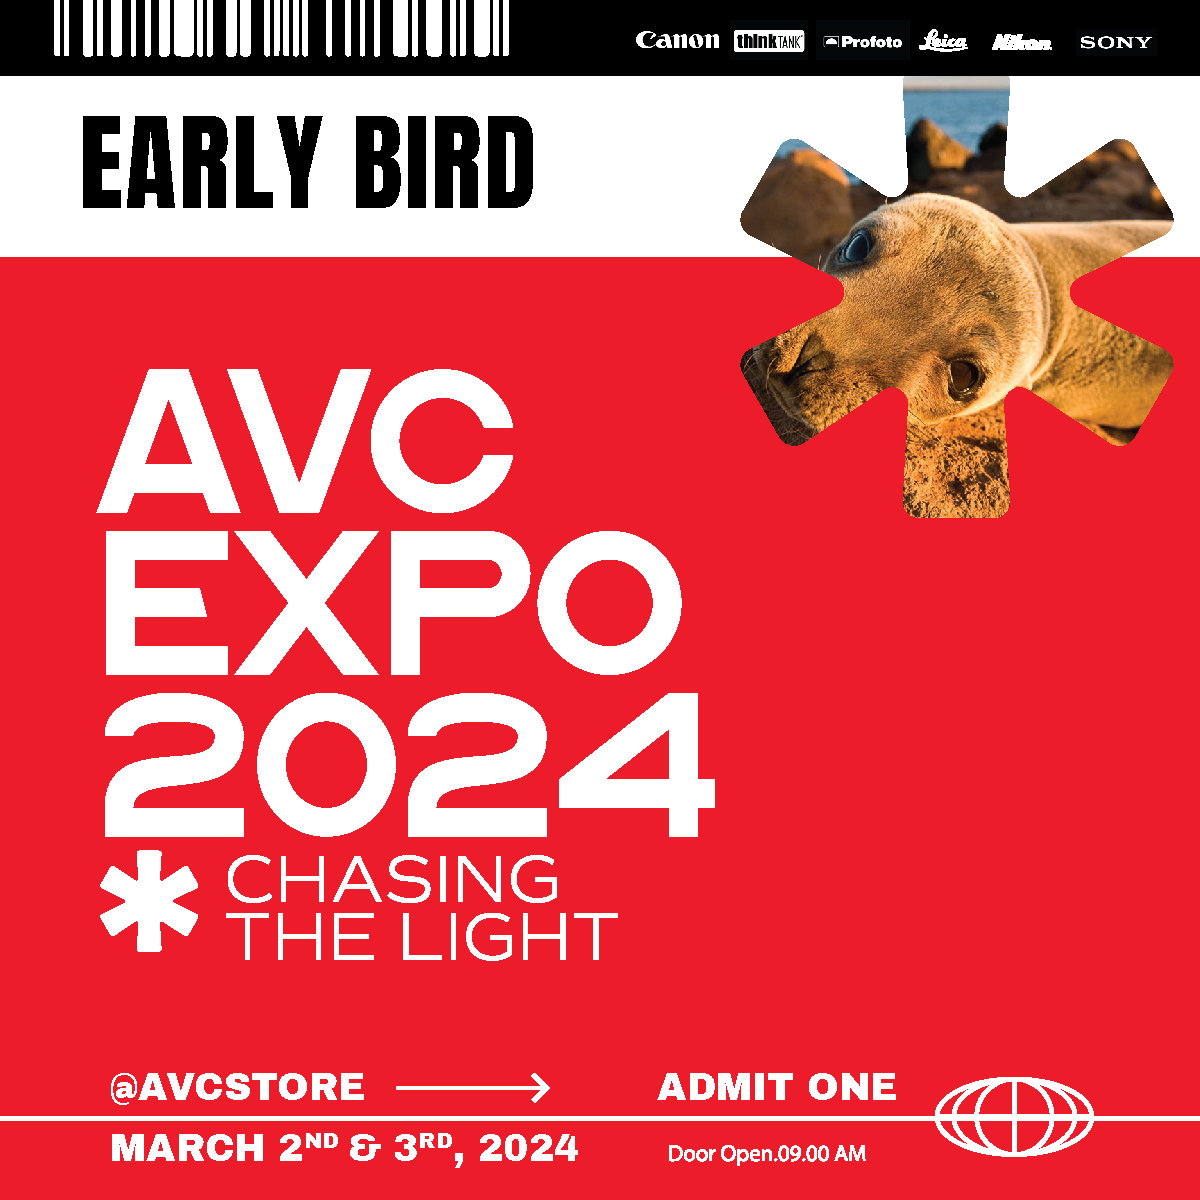 AVC Expo 2024: Chasing the Light - Early Bird